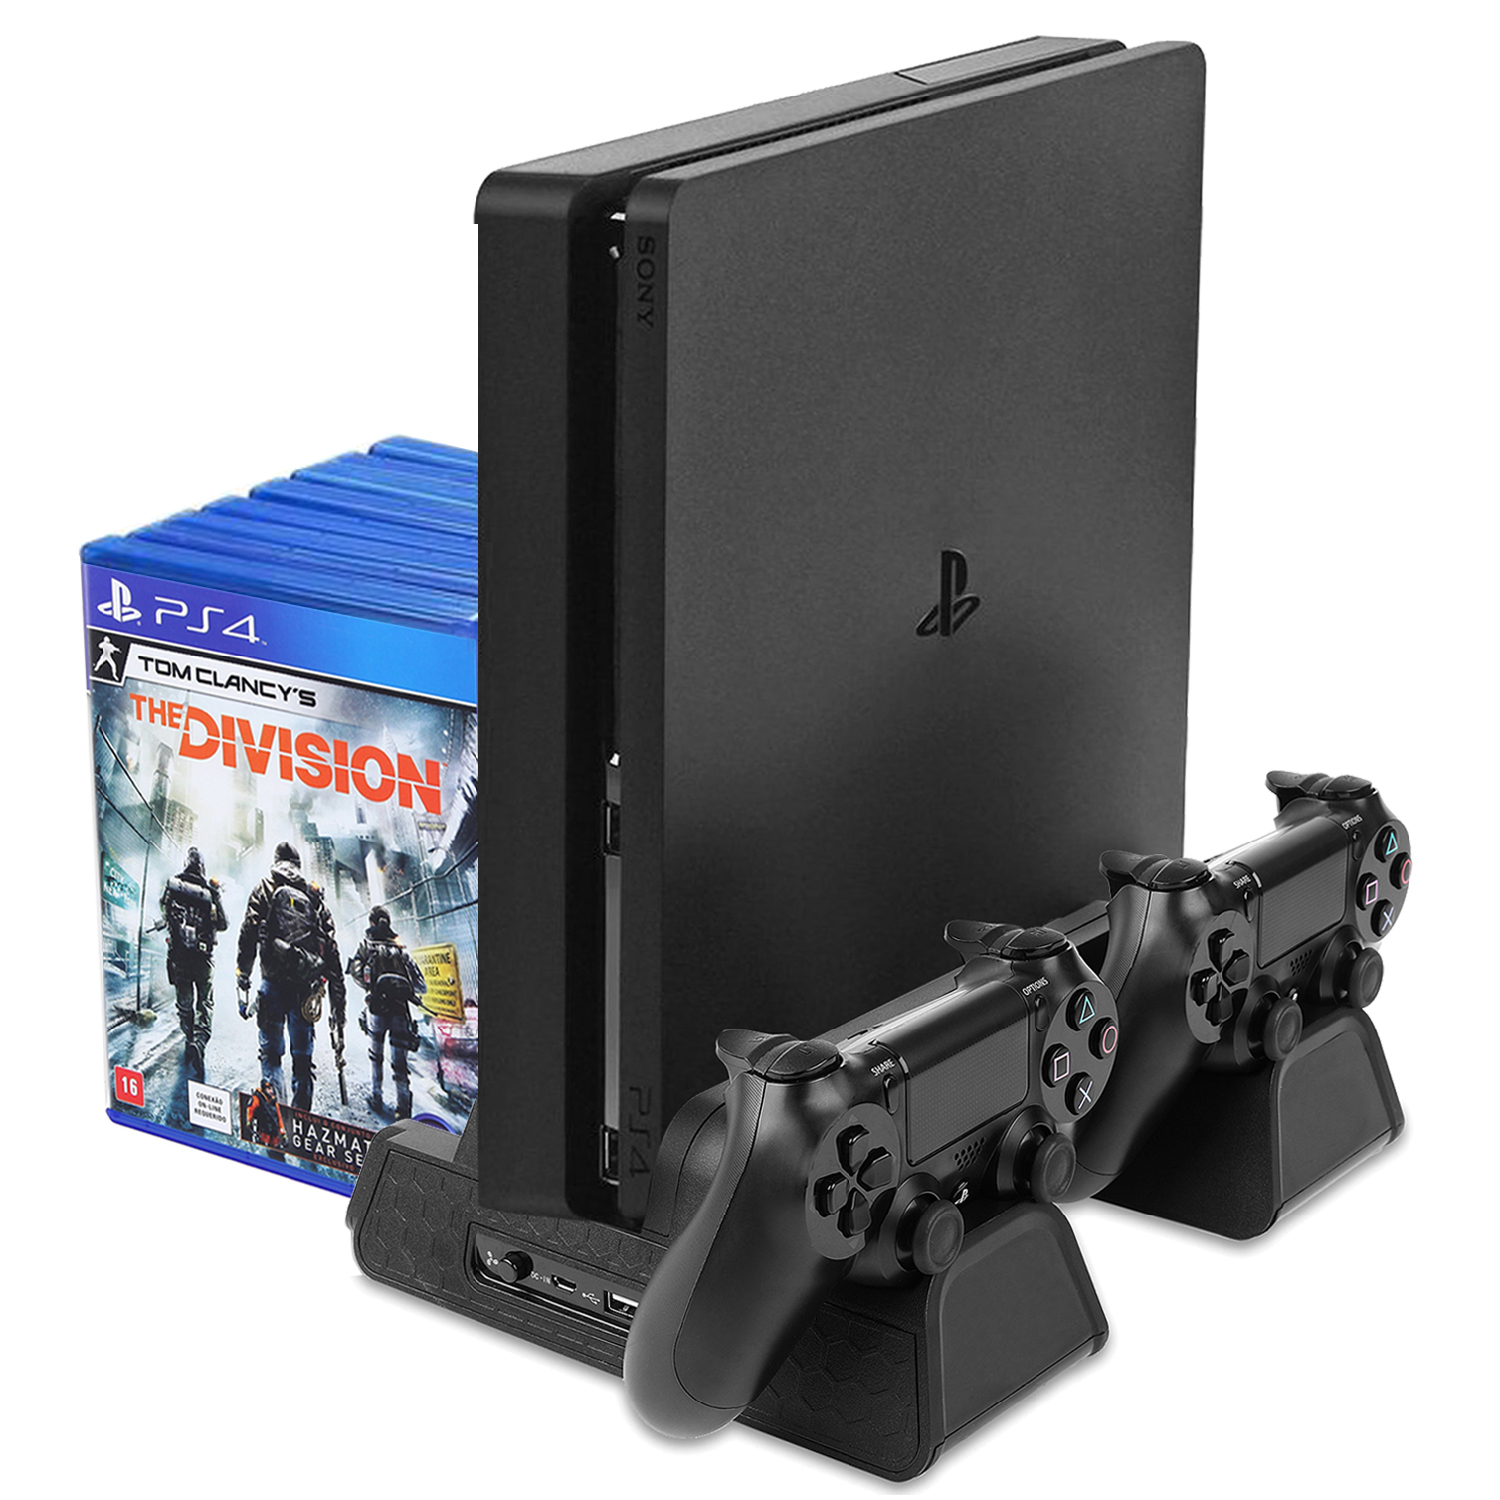 playstation 4 pro cooling stand